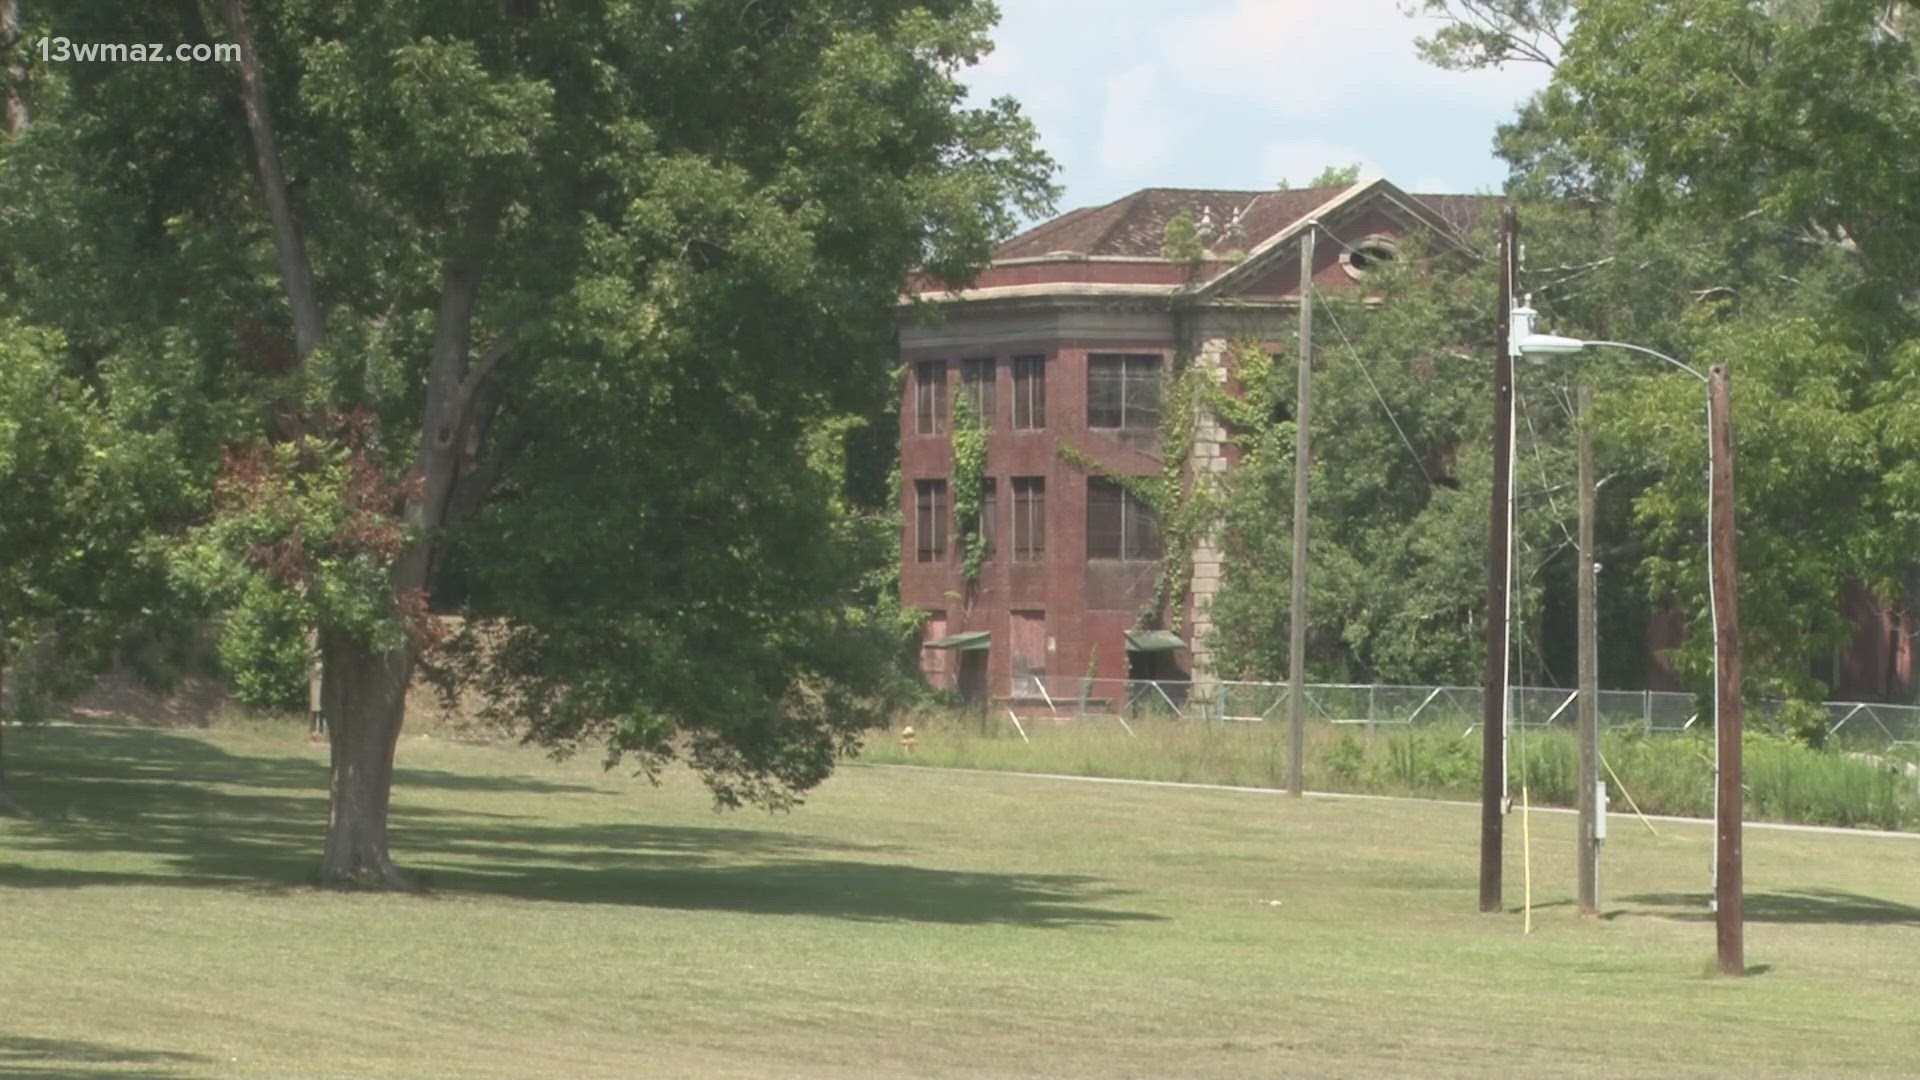 On Tuesday, Governor Kemp sign an executive order to raze the Jones, Green, Walker, and Wash buildings on Milledgeville's Central State campus saying they're unsafe